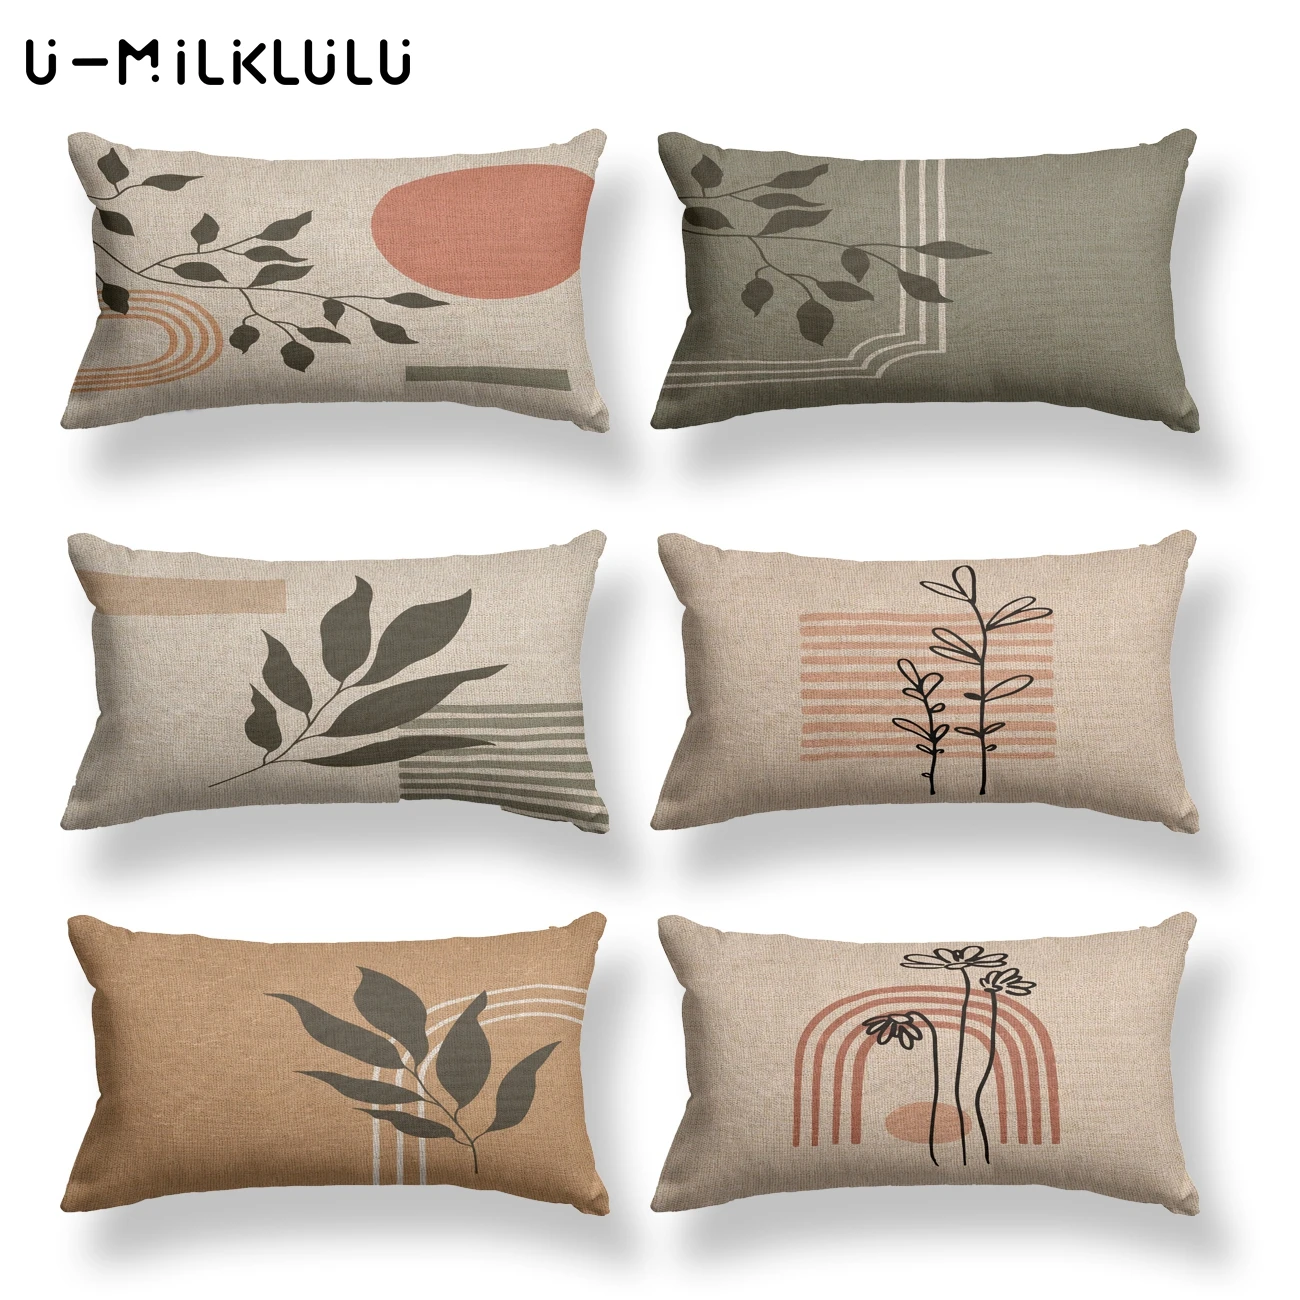 Vintage Style Home Decor Pillow Case Flower Plant Modern Art Pillow Covers Decorative 30X50 Nordic Garden Cushion Cover for Sofa